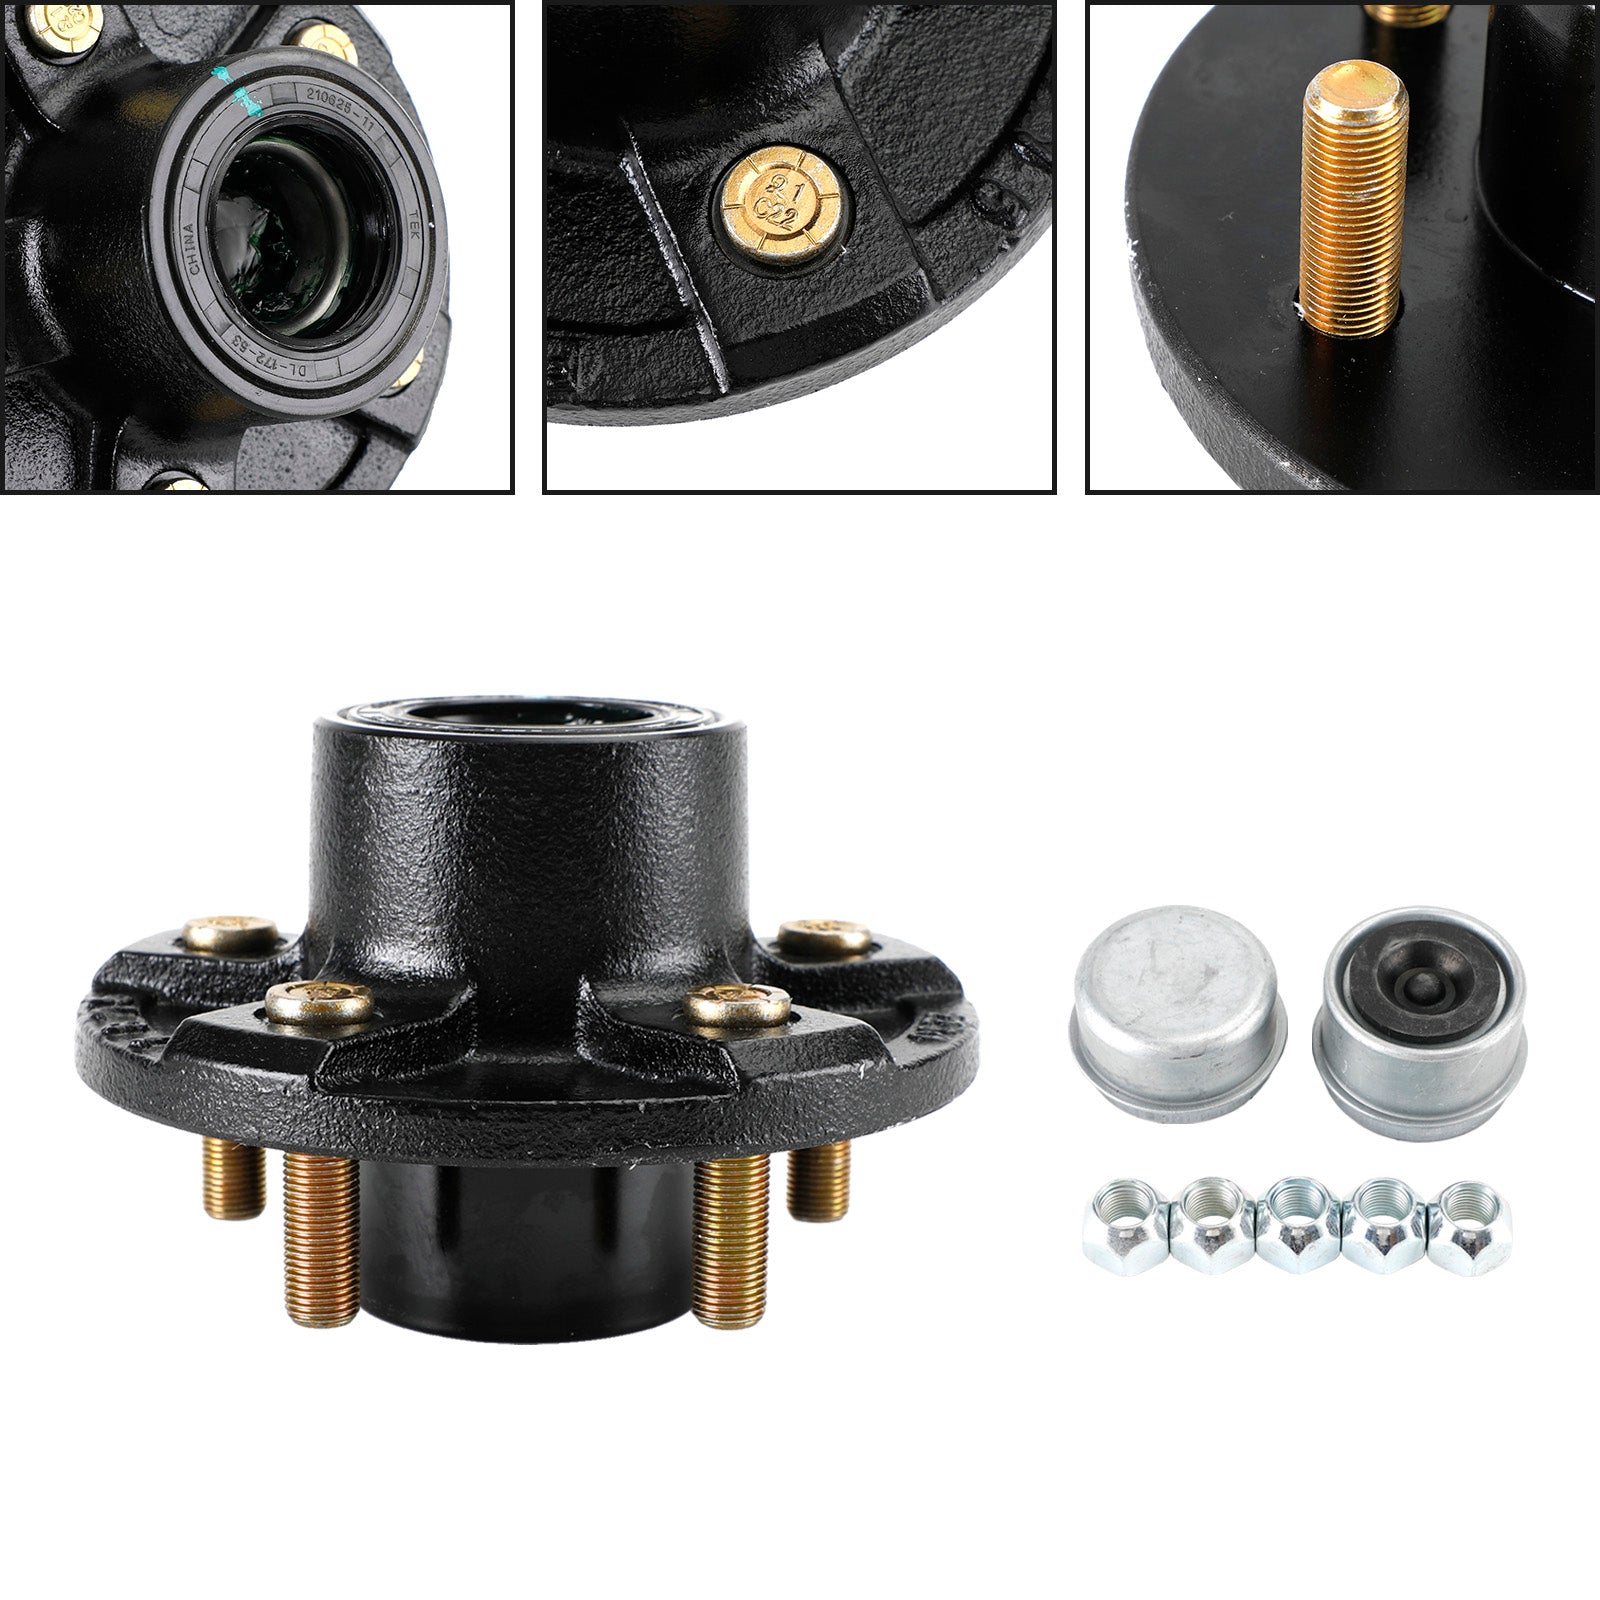 Grease Trailer Idler Hub Assembly for 3.5K Axles - 5 on 4-1/2 - Pre-Greased,Fits 3.5K E-Z Lube and etrailer Easy Grease axles